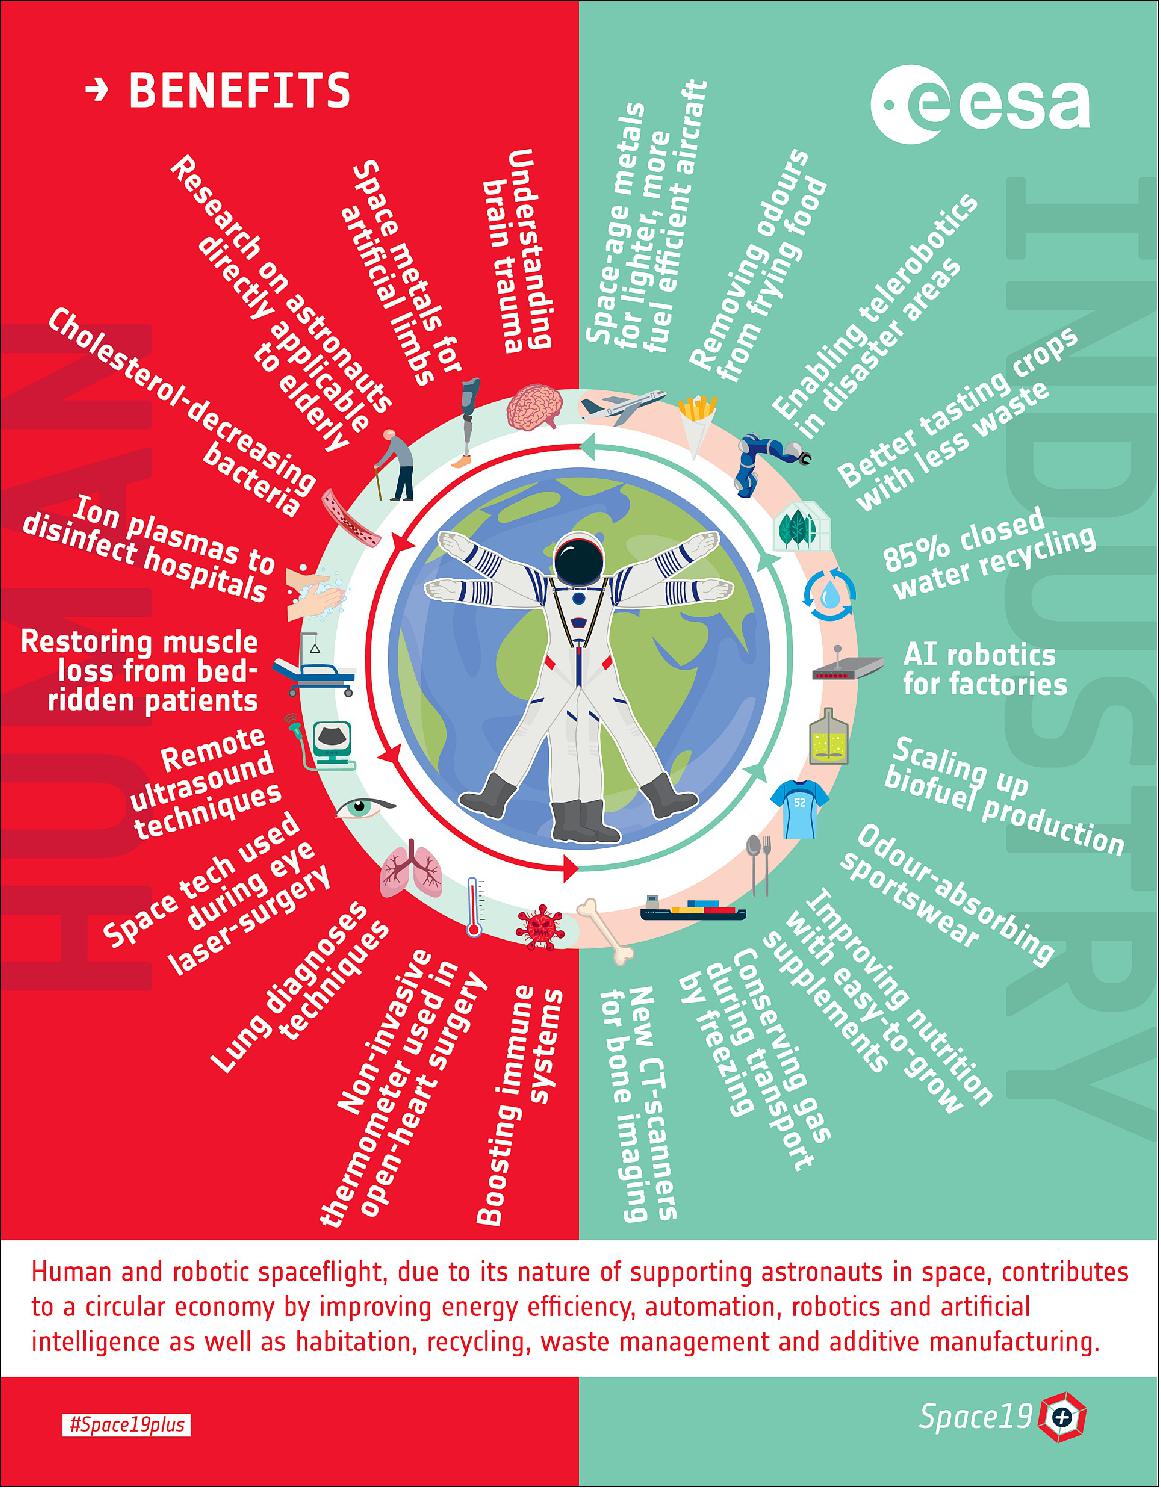 Figure 3: This infographic shows some of the benefits for humankind that have been made available through ESA’s human and robotic spaceflight programme. The challenges of space exploration accelerate innovation for all on Earth. Human and robotic spaceflight is moving technology towards a circular economy by improving efficiency in energy, automation, robotics, artificial intelligence, habitation technology, recycling, waste management, and additive manufacturing. - Scientific discoveries from human exploration are applied widely from health to metallurgy, while deeper knowledge about our solar system and life beyond Earth changes our perceptions of humankind (image credit: ESA–K. Oldenberg)